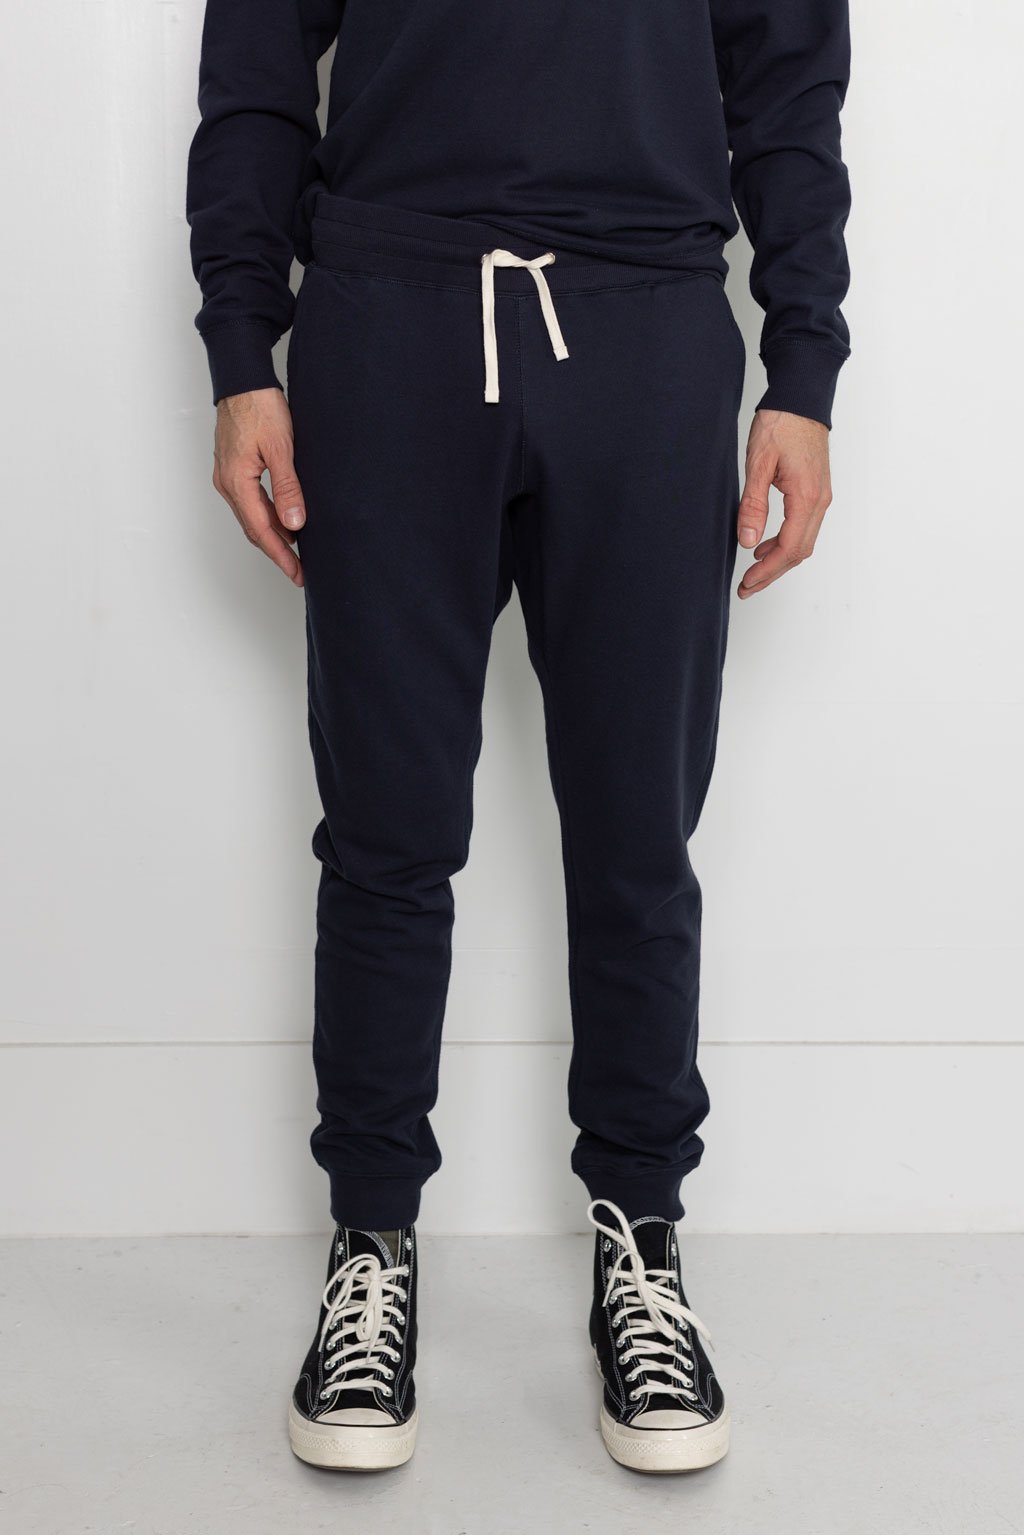 NS2167-2 250g French Terry Sweatpants in Navy 02